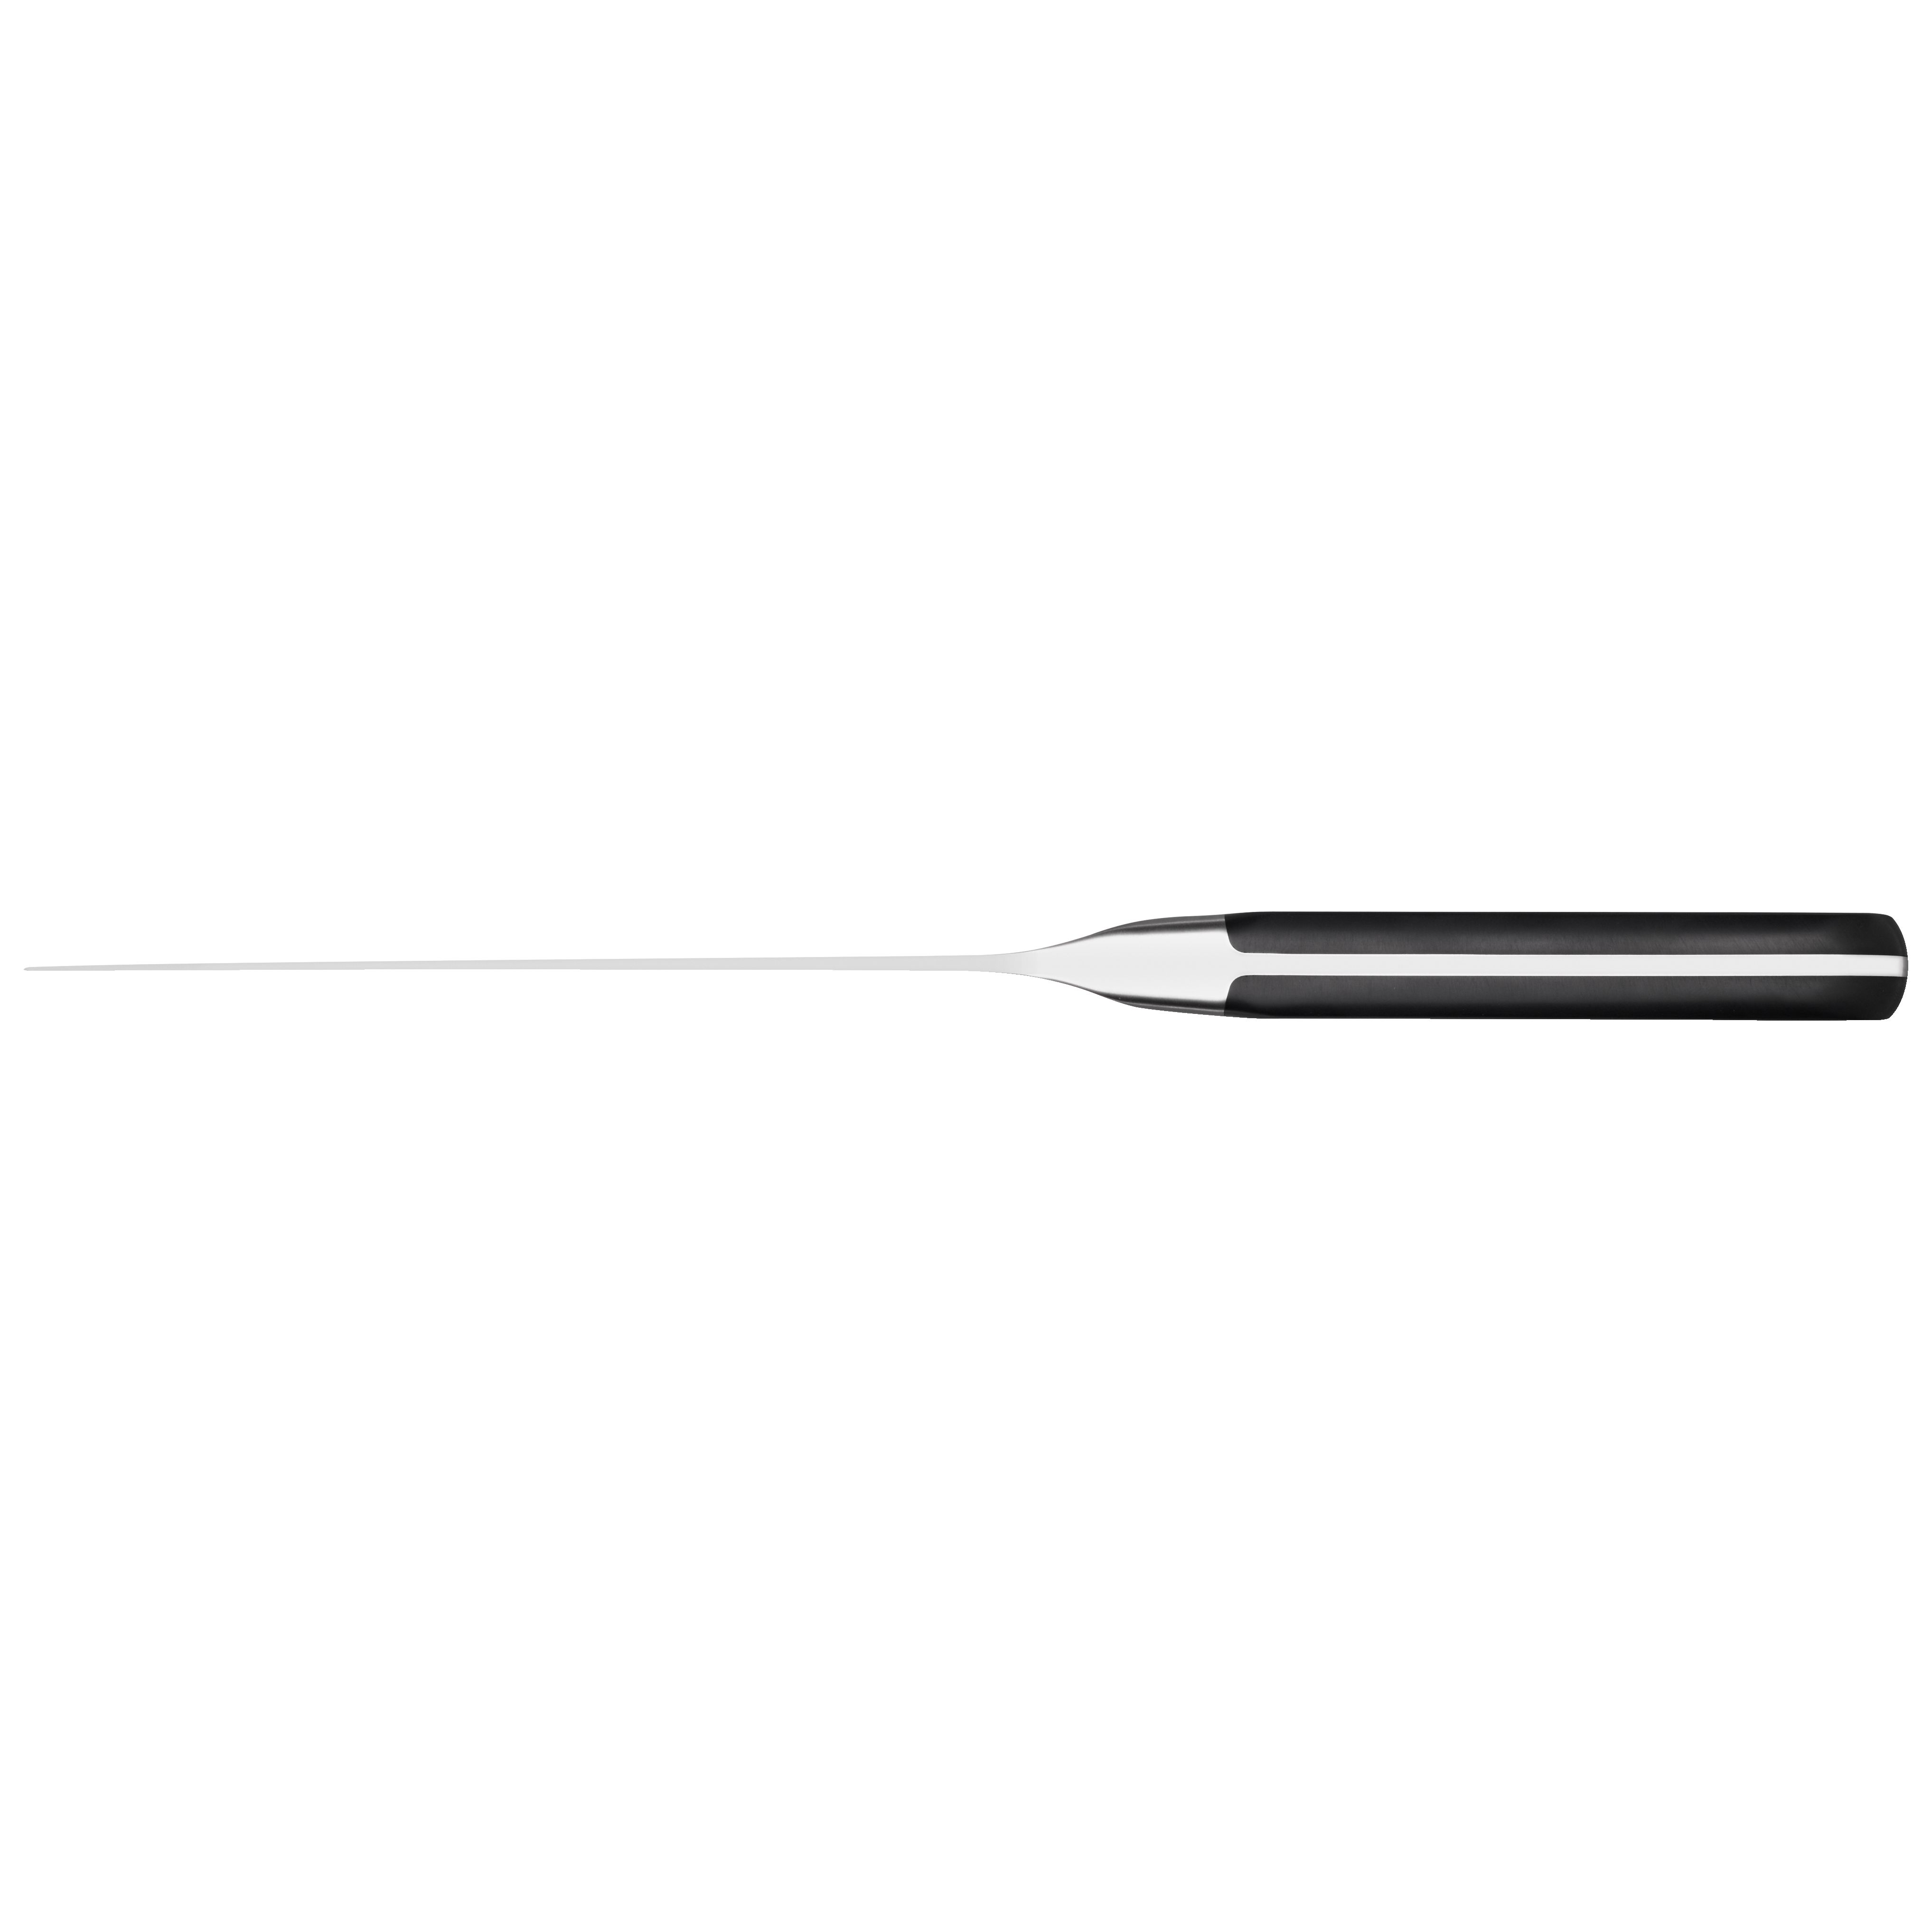 Buy ZWILLING Pro Chef\'s knife